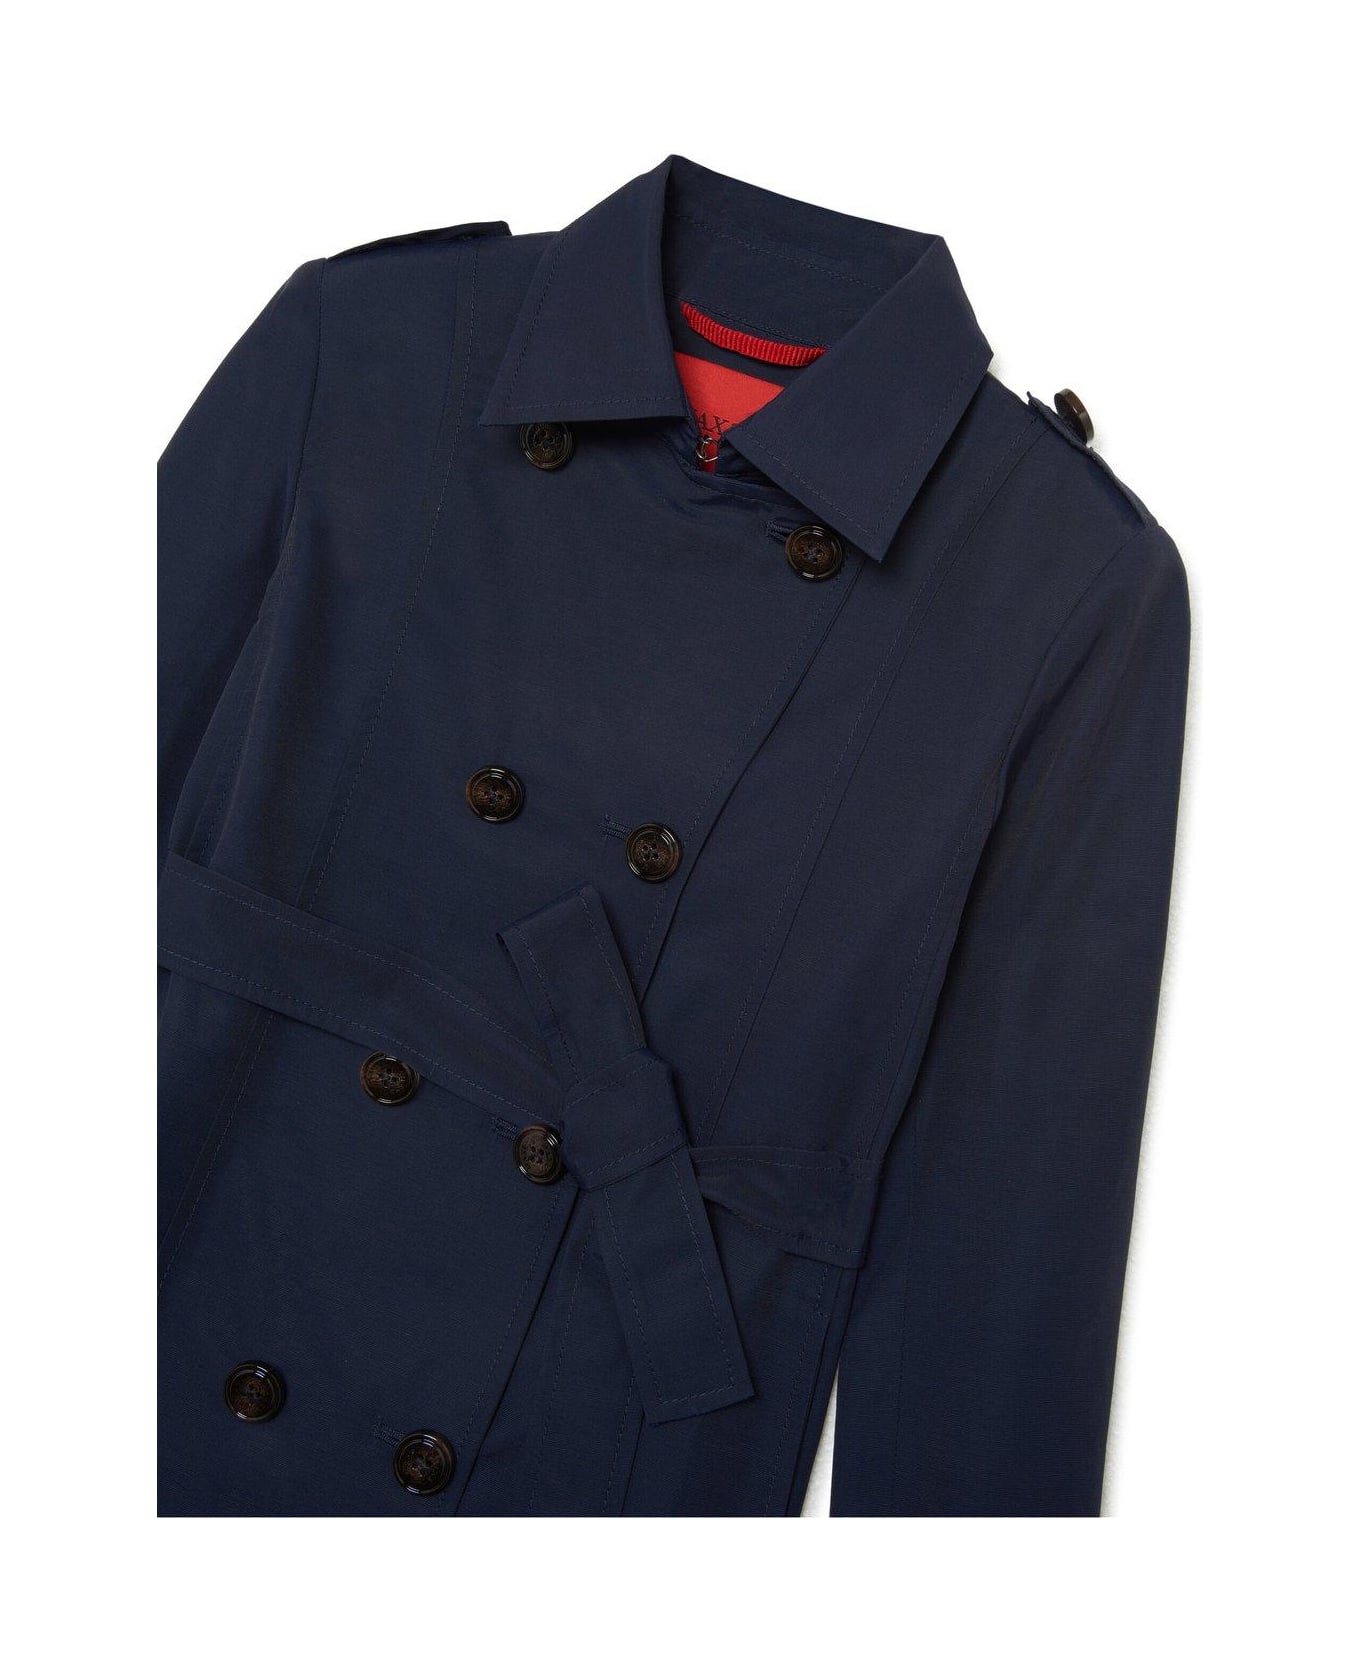 Max&Co. Belted Double-breasted Long Sleeved Coat - Blu